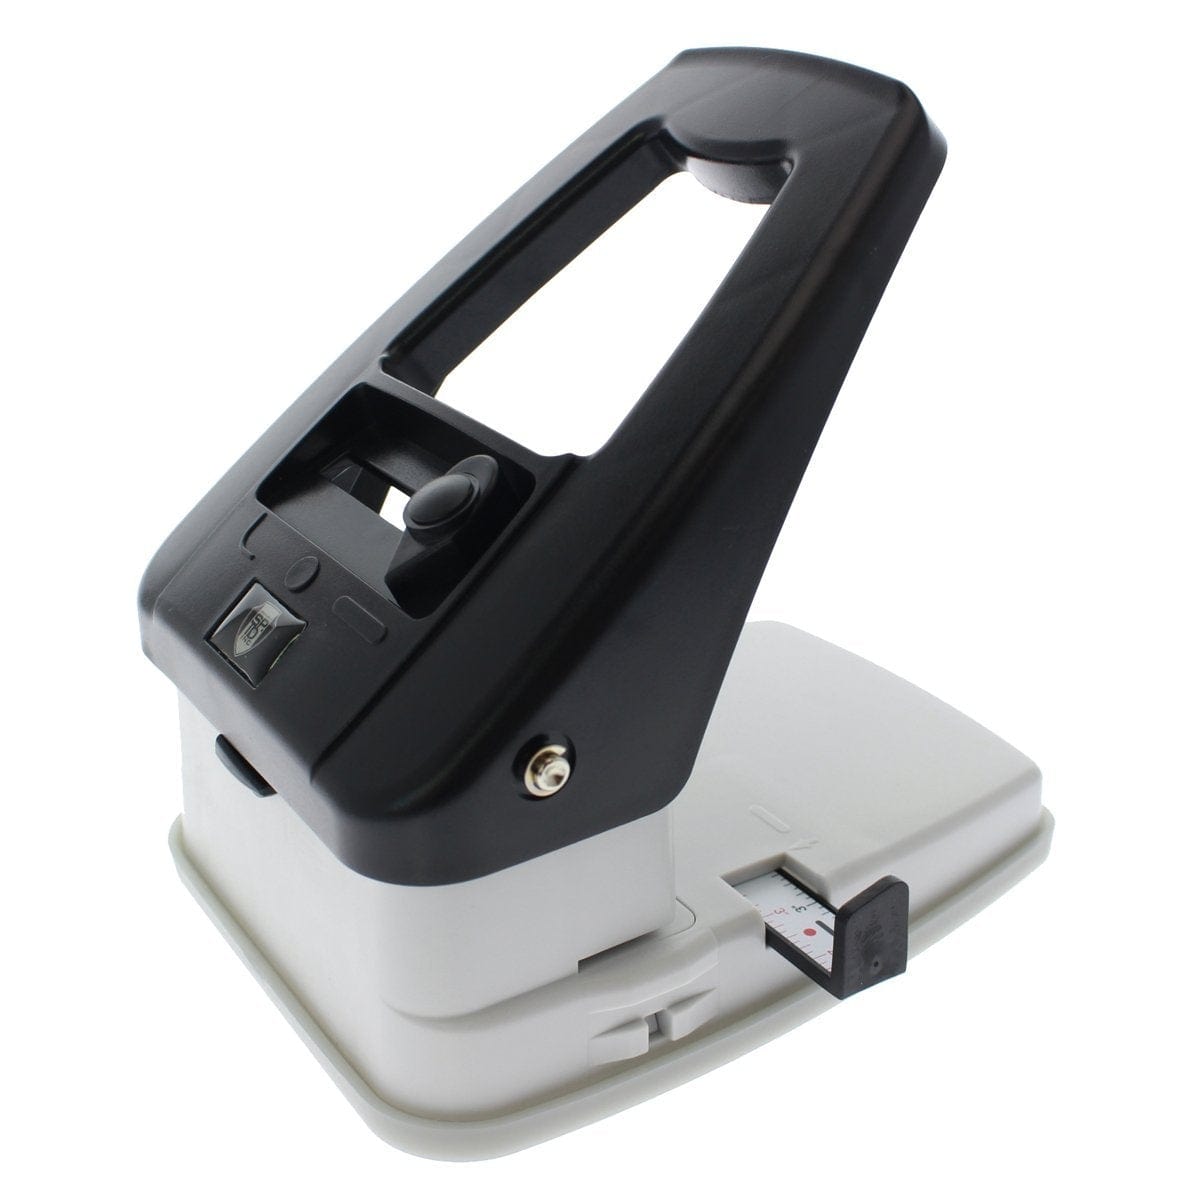 Desktop ID Card Hole Punch Tool for Name Badges - Three in One Slot Puncher with Guide (Slot Hole, Round Hole, Corner Rounder)